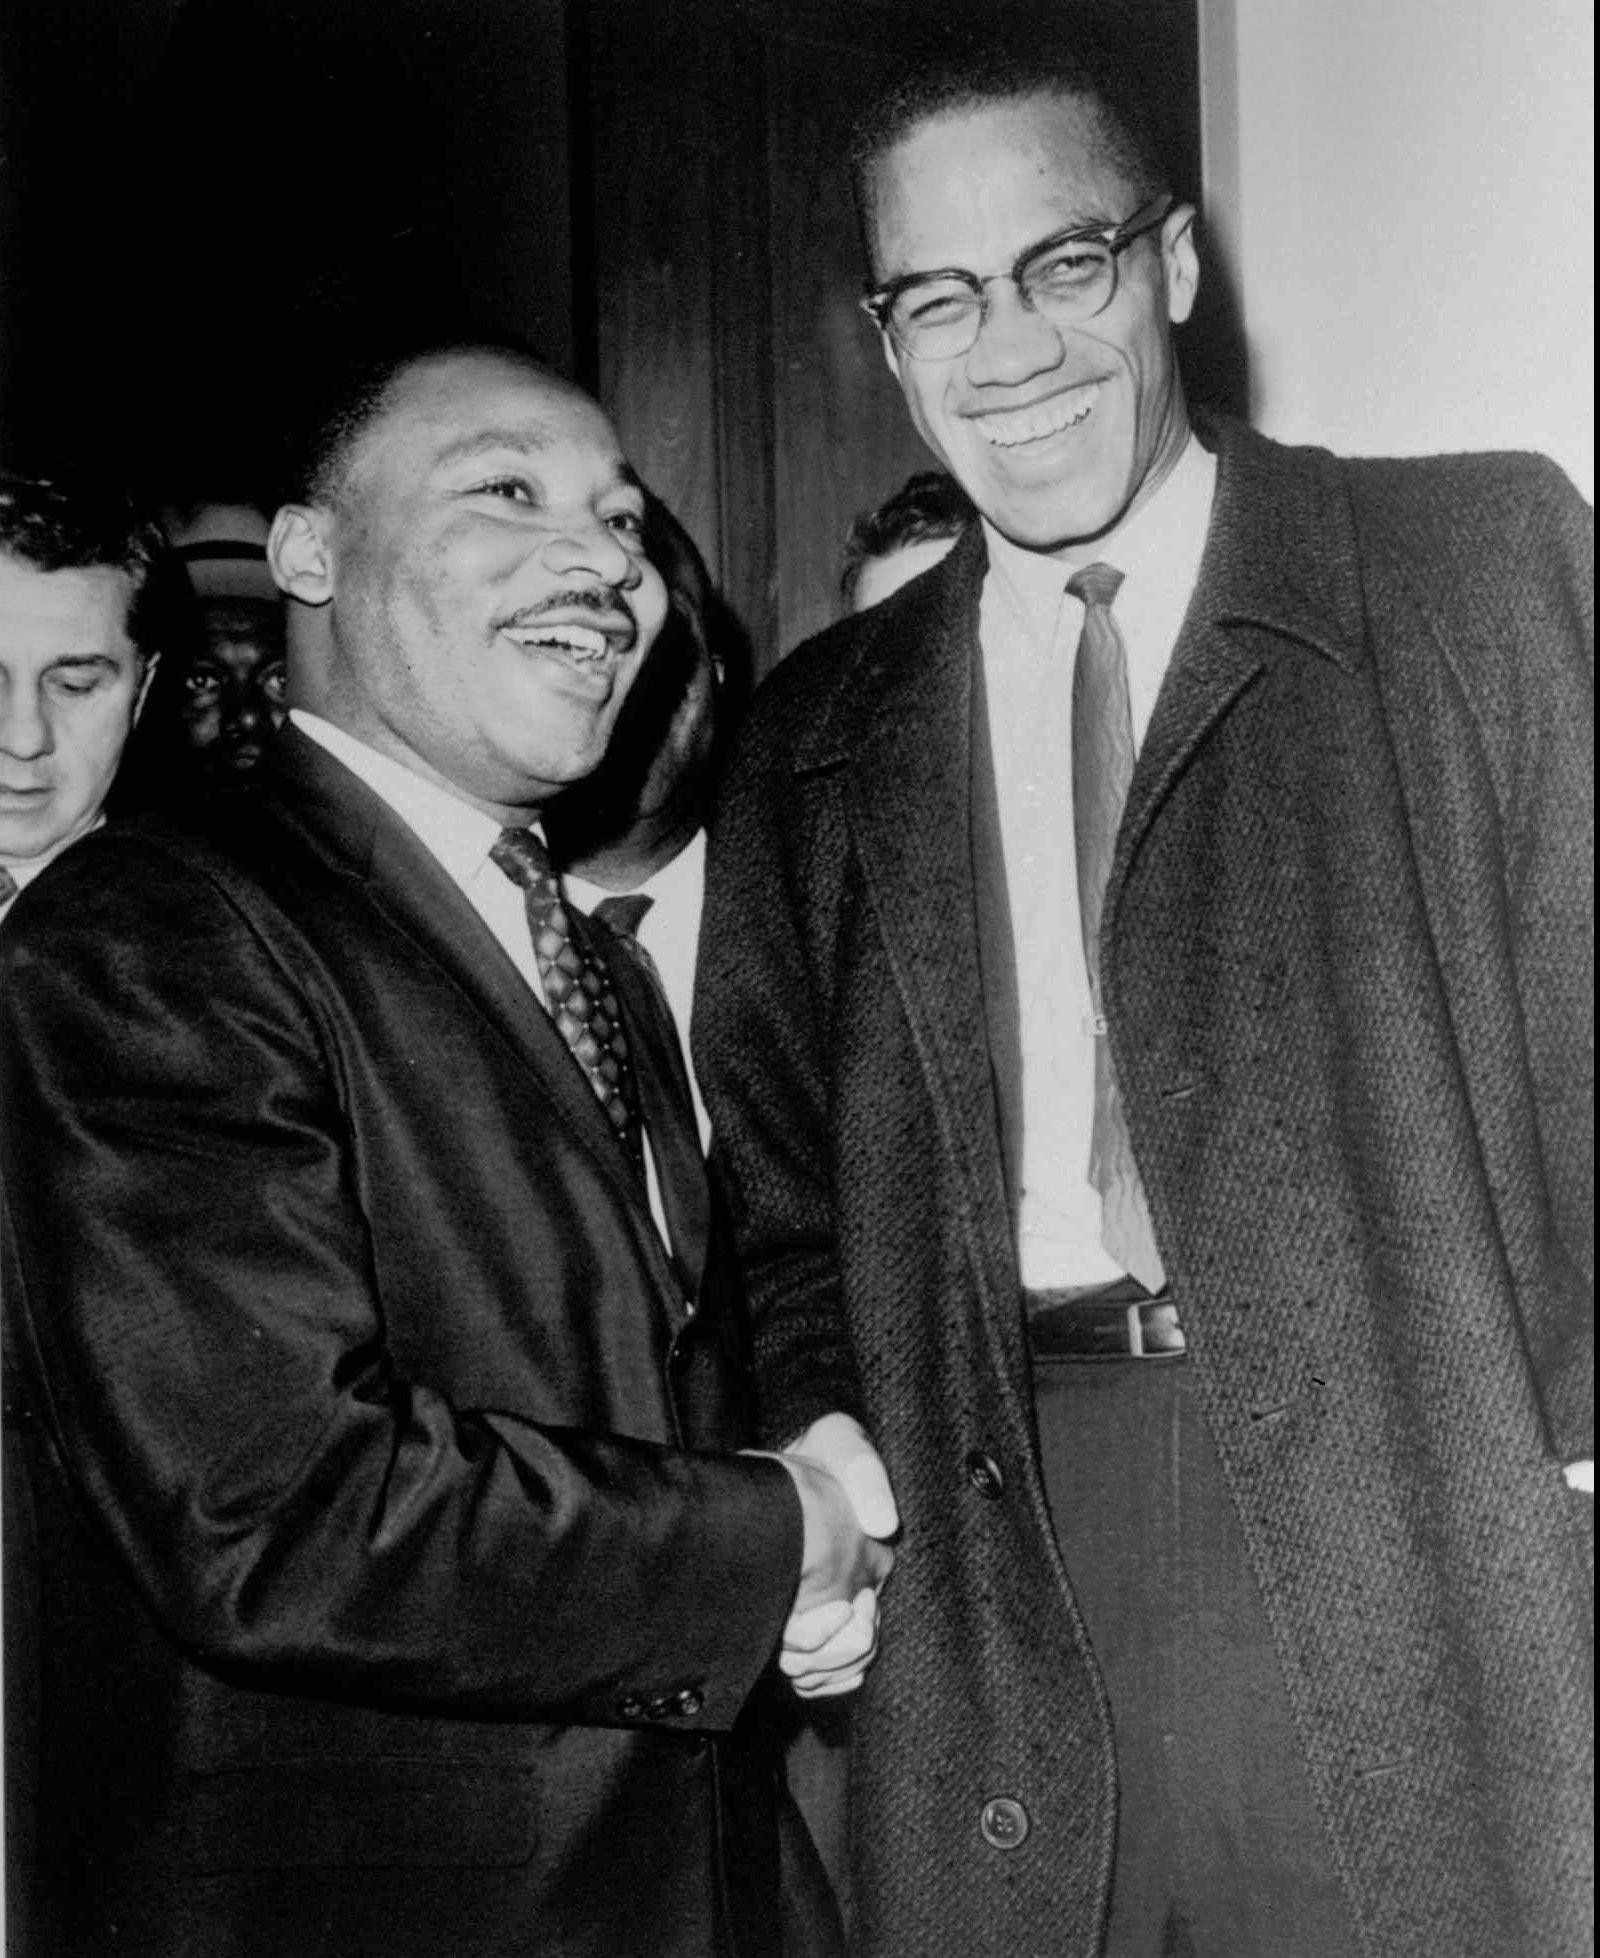 The Rev. Martin Luther King Jr., left, of the Southern Christian Leadership Conference, and fellow civil rights leader Malcolm X, heading a new group known as Muslim Mosque, smile for photographers in 1964. Photo: AP